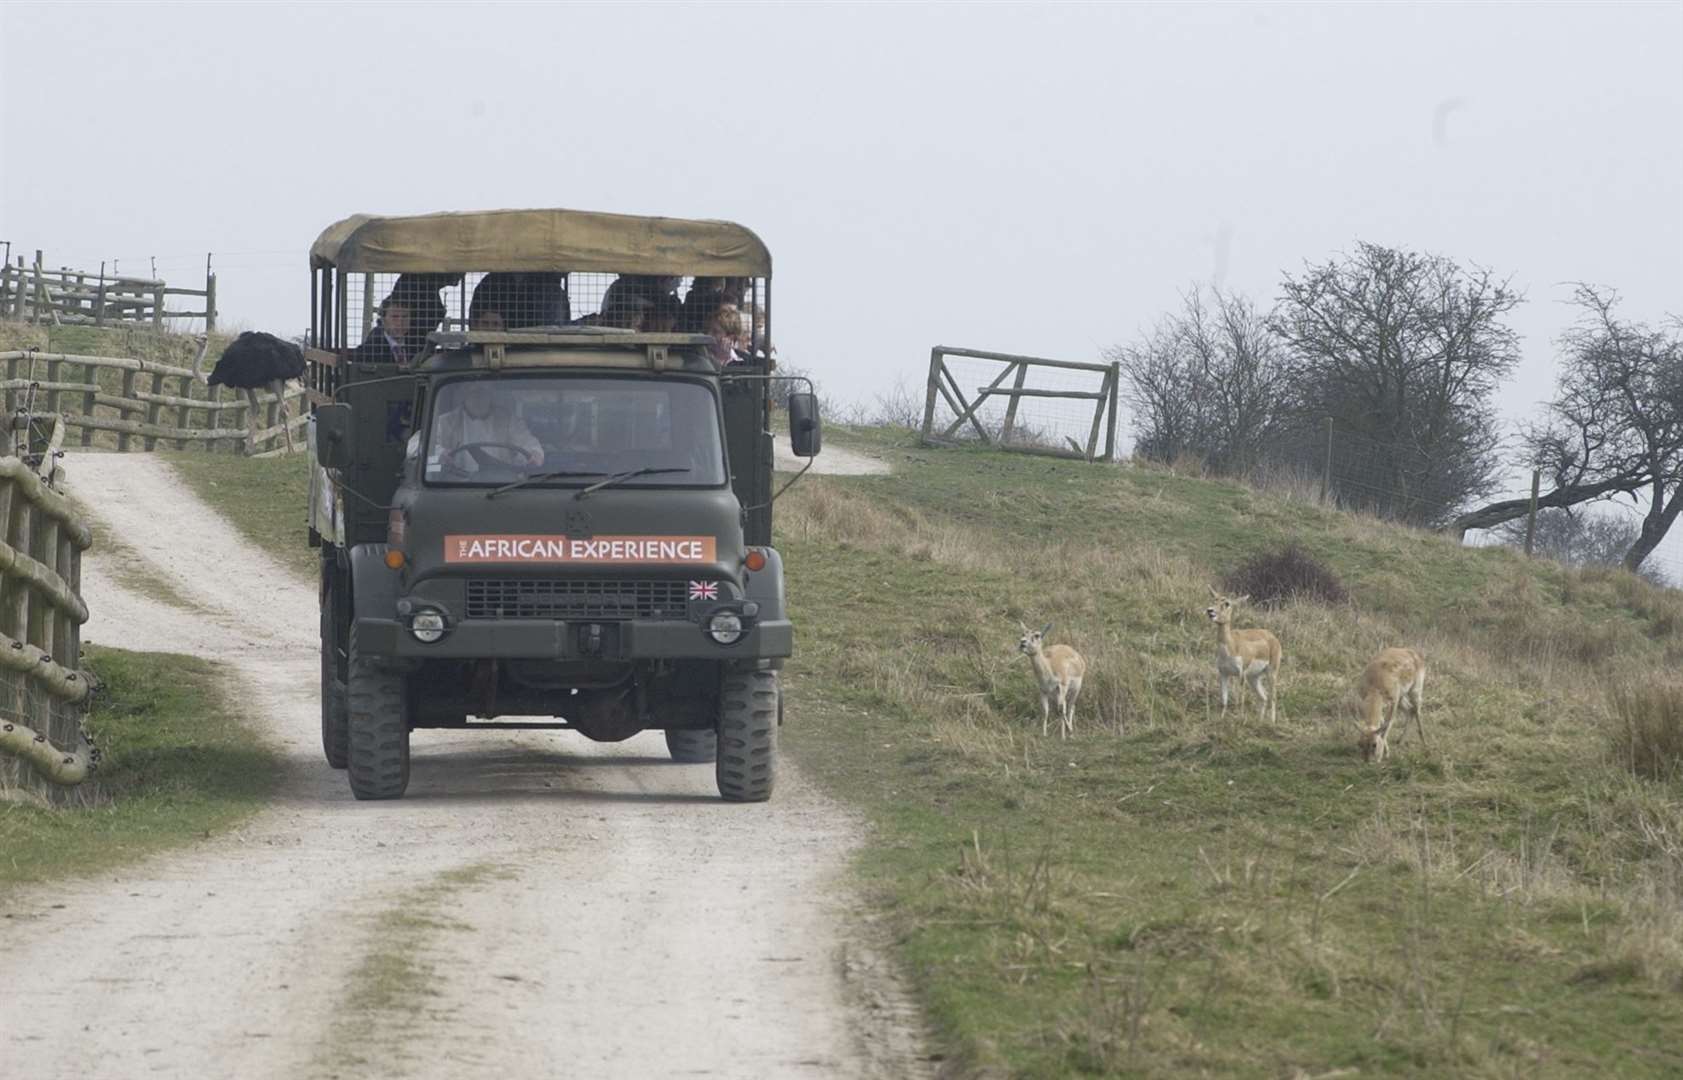 Public footpaths run alongside Port Lympne's 'African Experience', which launched in 2005